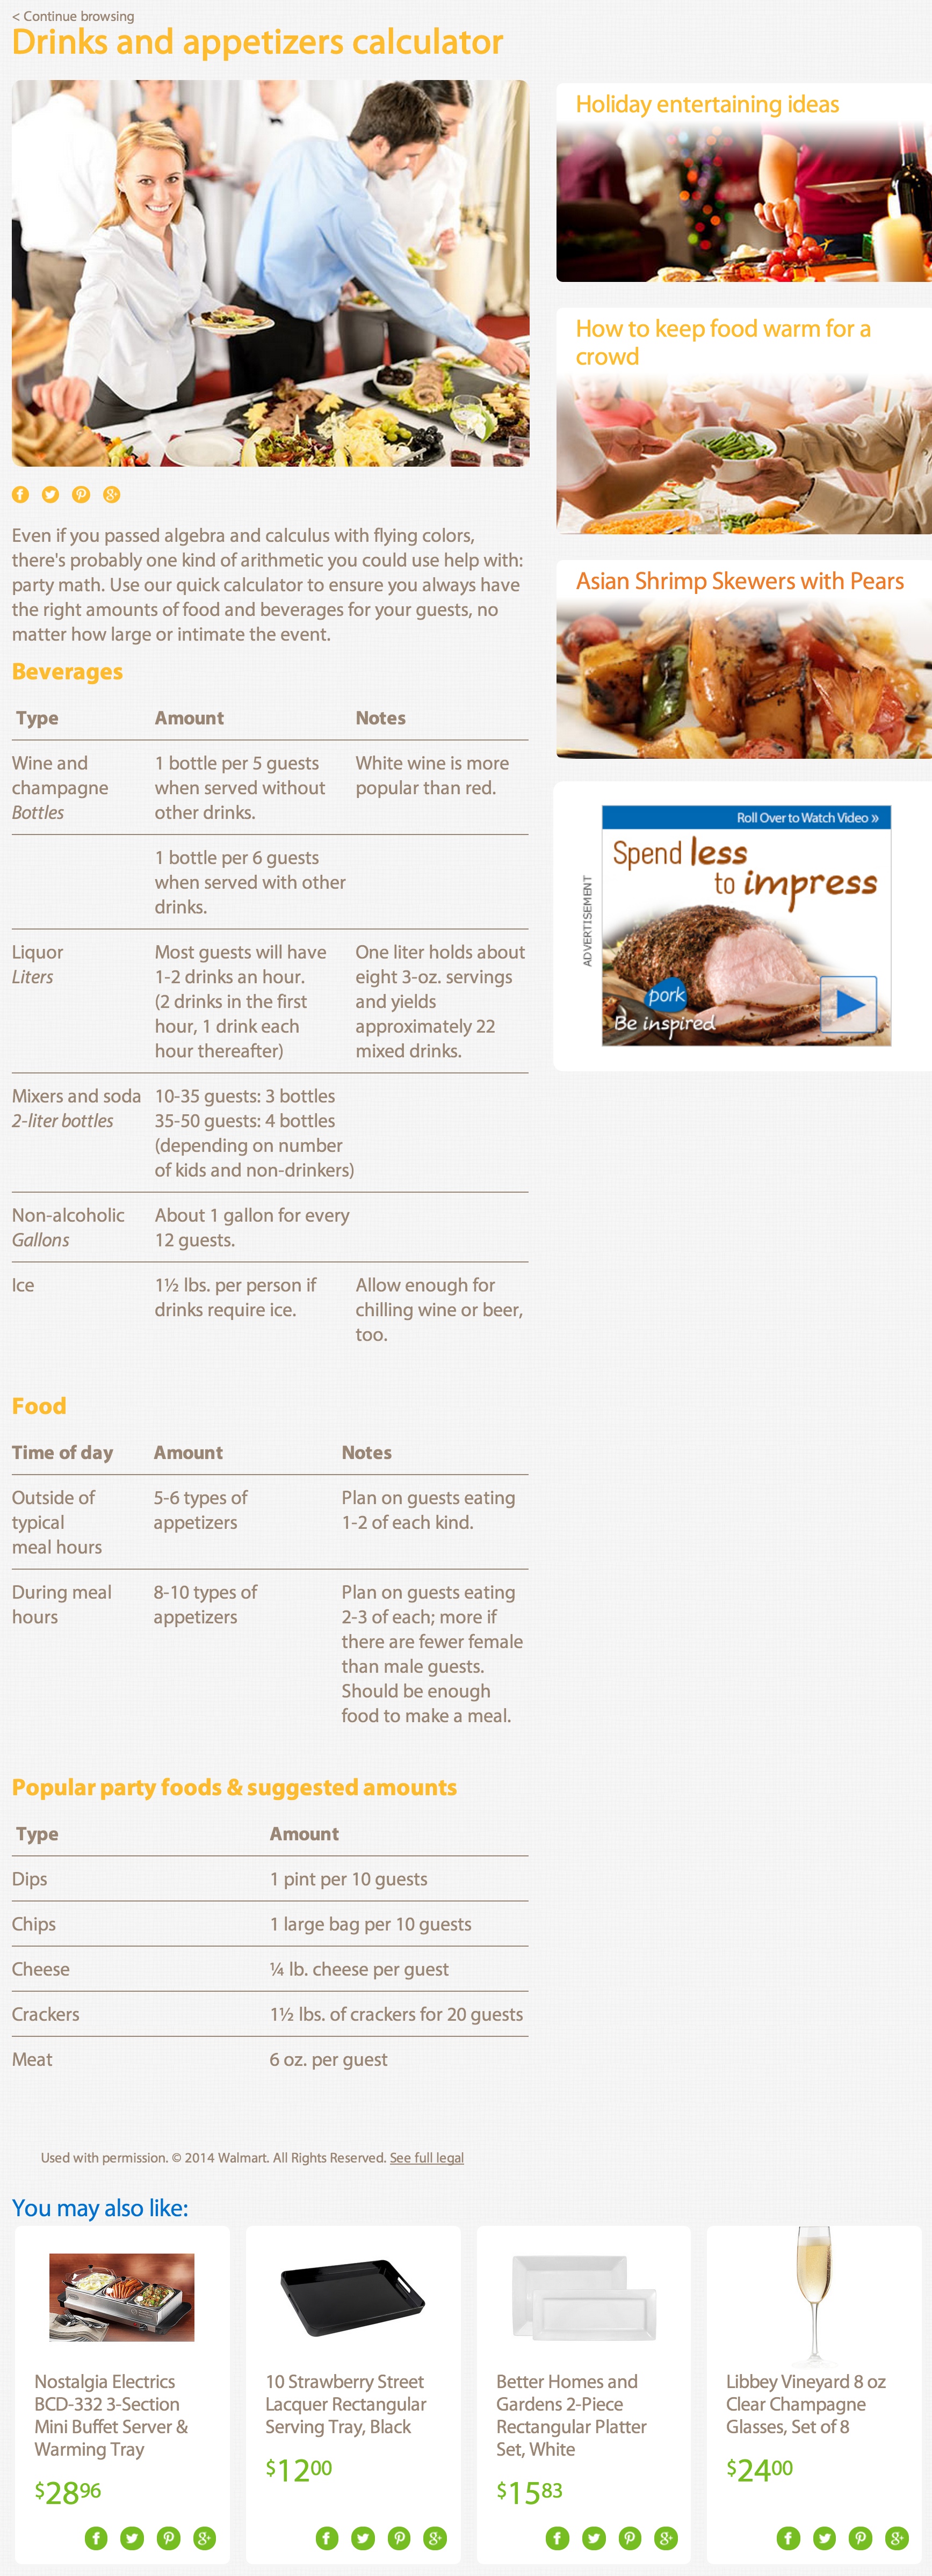 Walmart.com Food & Entertaining Drinks and Appetizers Calculator